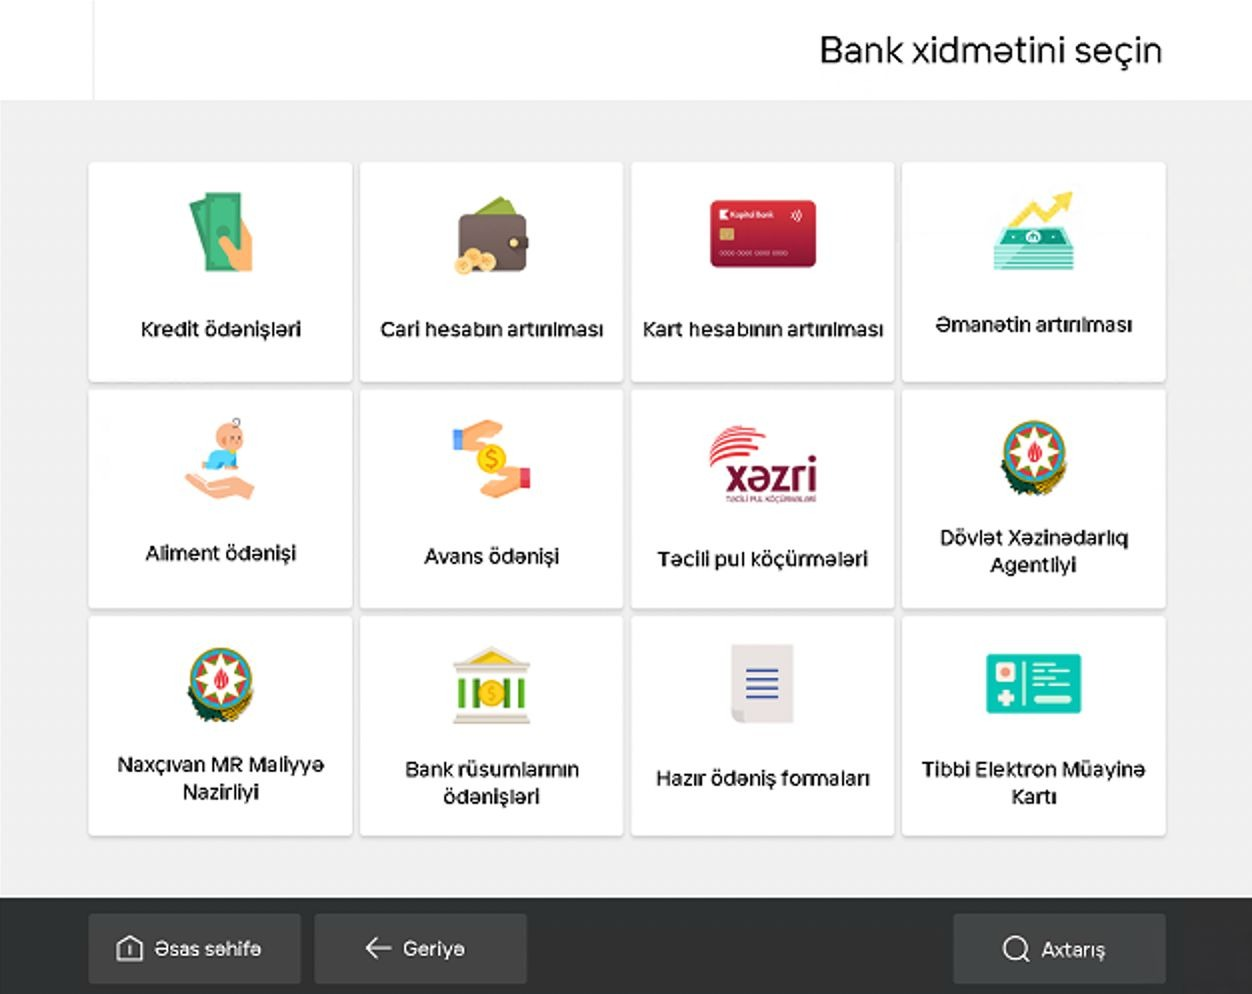 Select "Deposit replenishment" service among the banking services